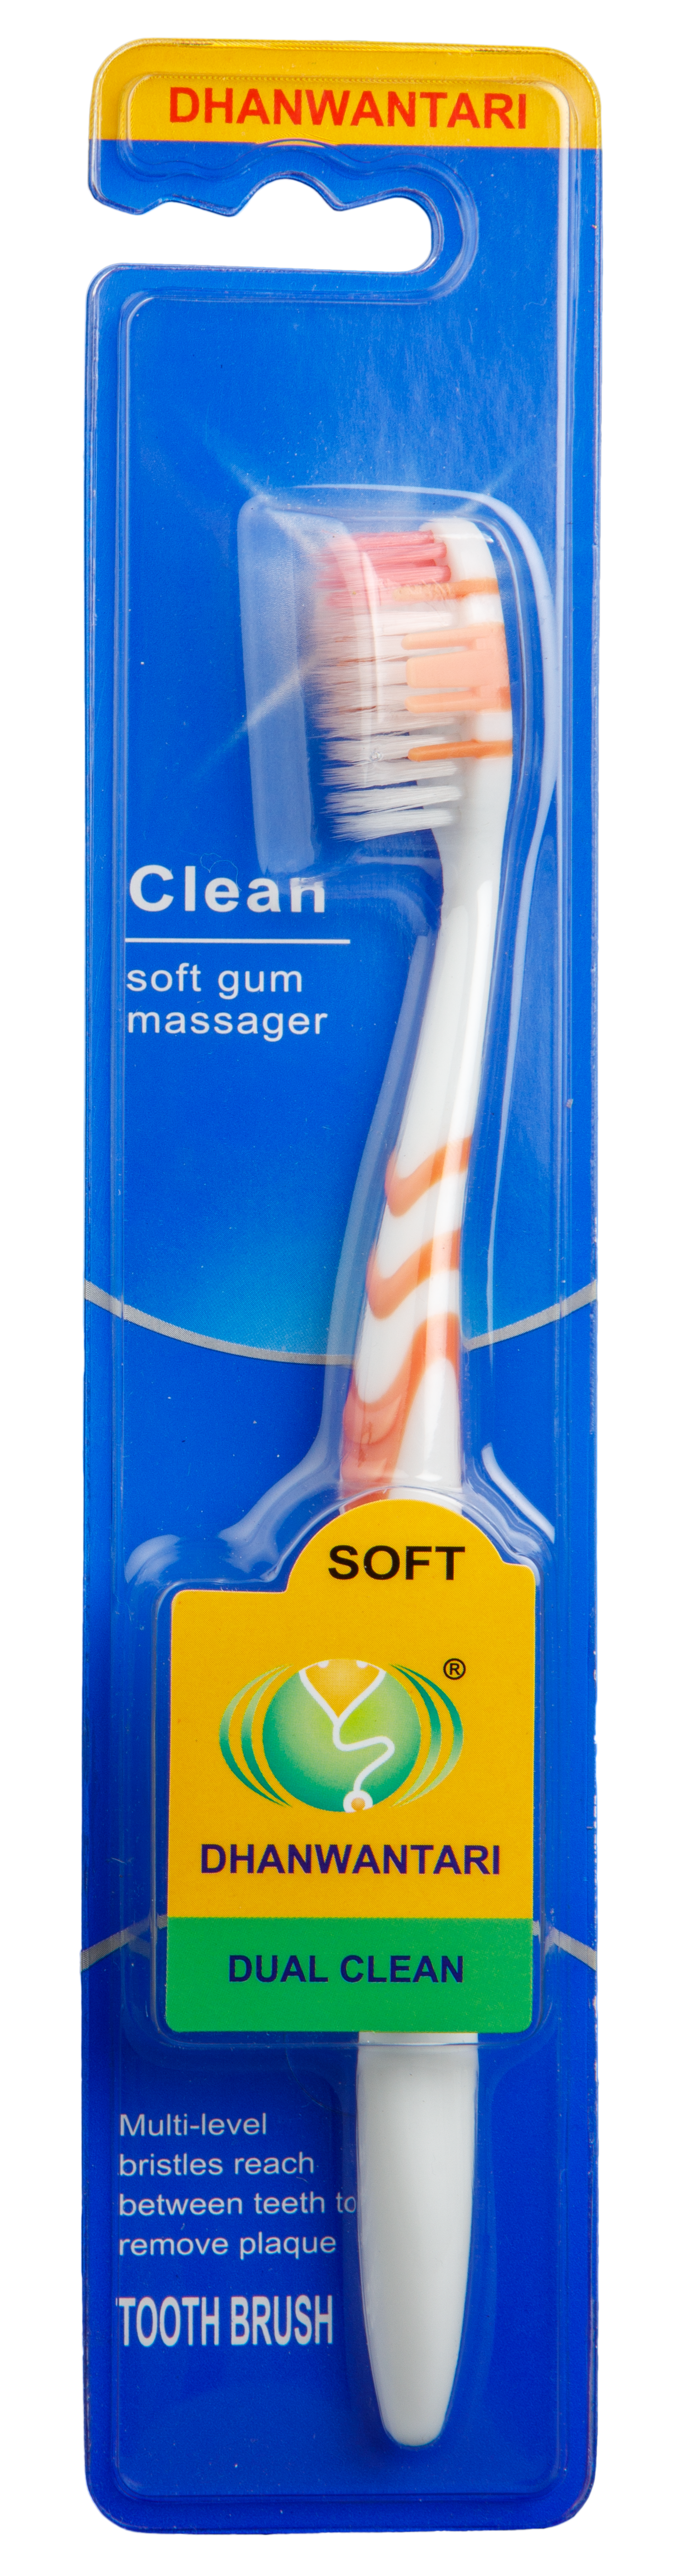 T G Care Toothbrush